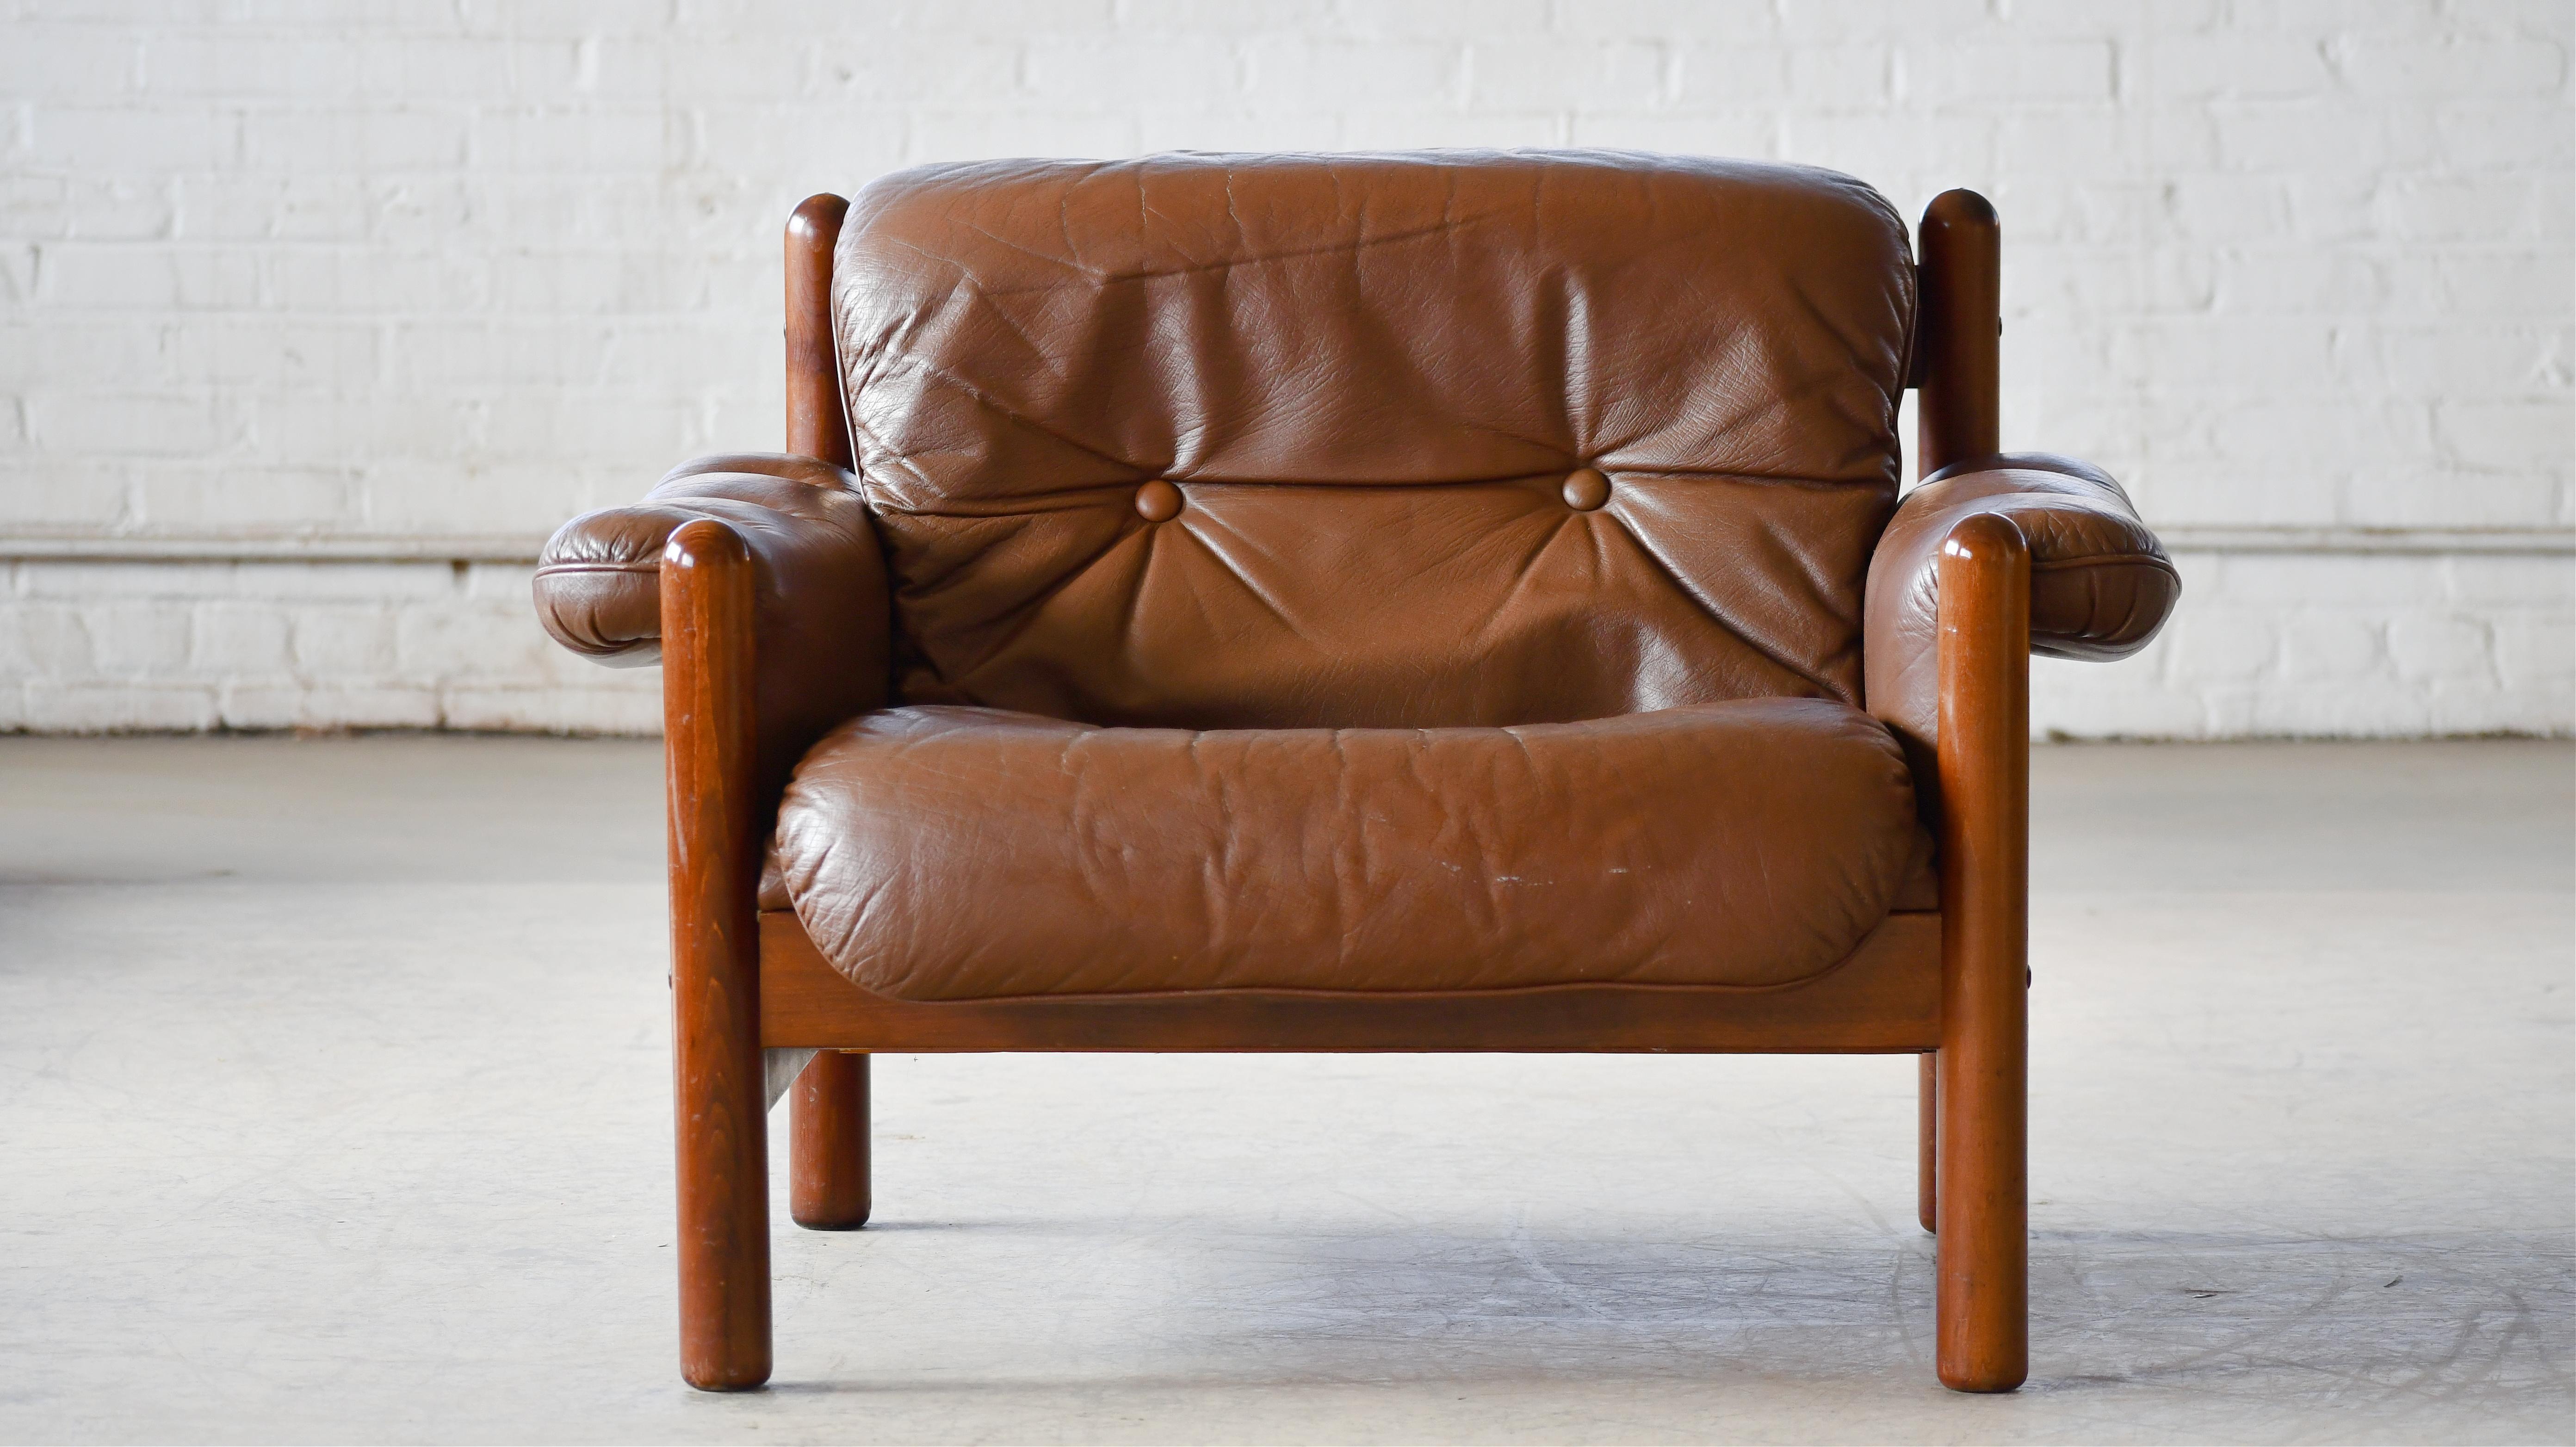 Low Danish easy chair with brown leather cushions and rosewood stained beechwood frame. In the style of Kristian Vedel and Bruno Mathsson among other that made the this relaxed style famous in the 1960's and 70's. Some sun fading of the frame but